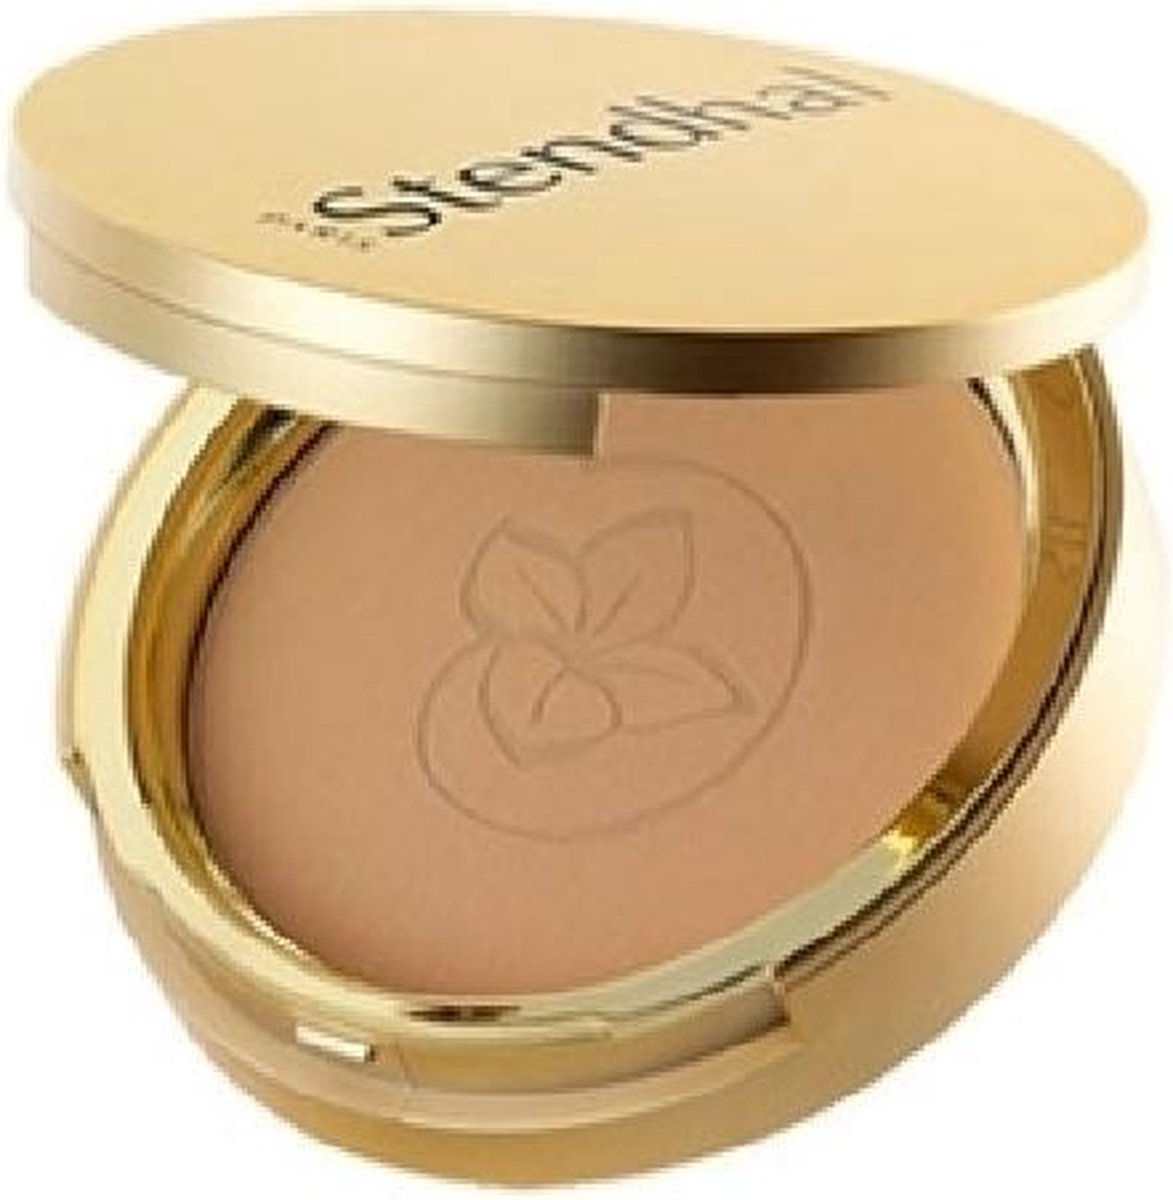 Ayer Stendhal Pur Luxe Poudre Compacte 10g - Ayer